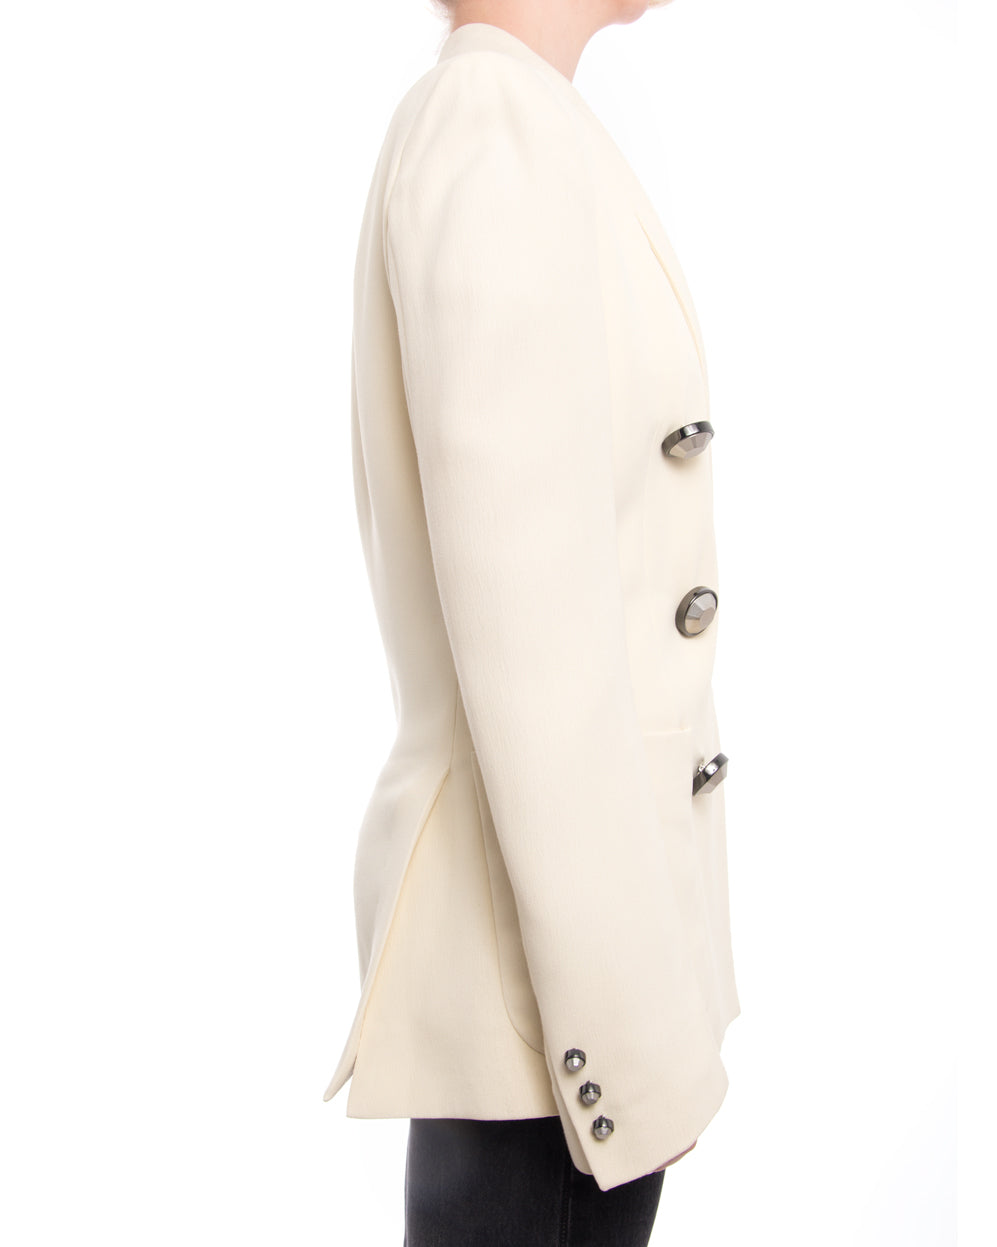 Christopher Kane Spring 2015 Runway Ivory Jacket with Silver Buttons